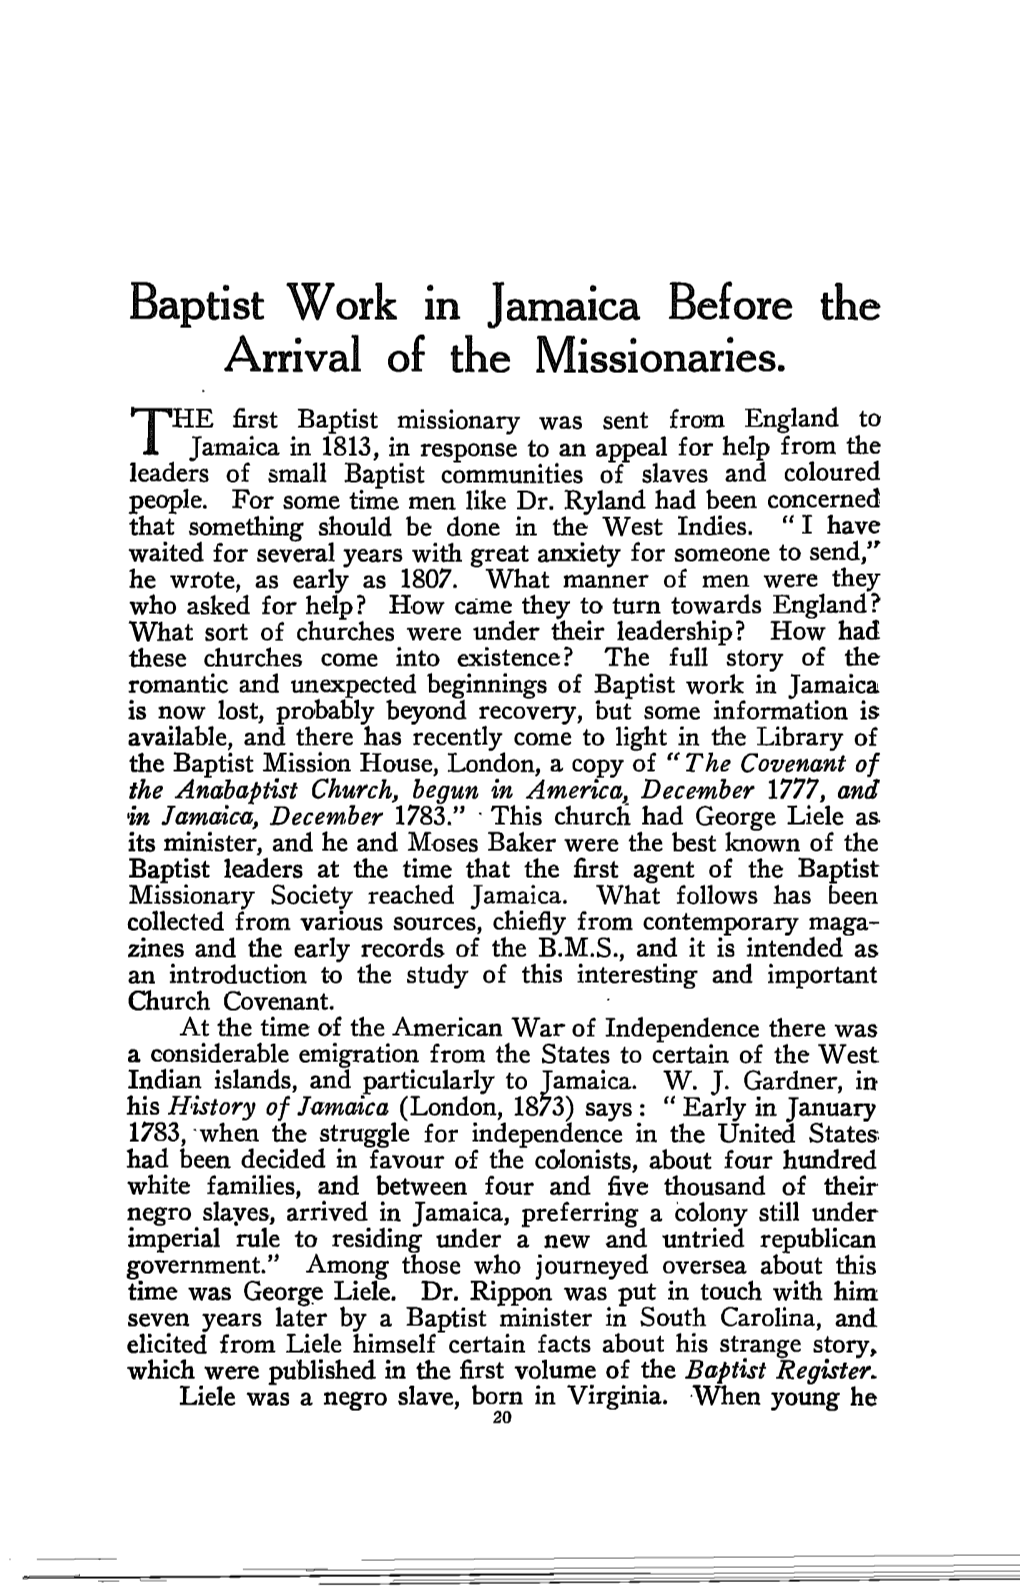 Baptist Work in Jamaica Before the Arrival of the Missionaries